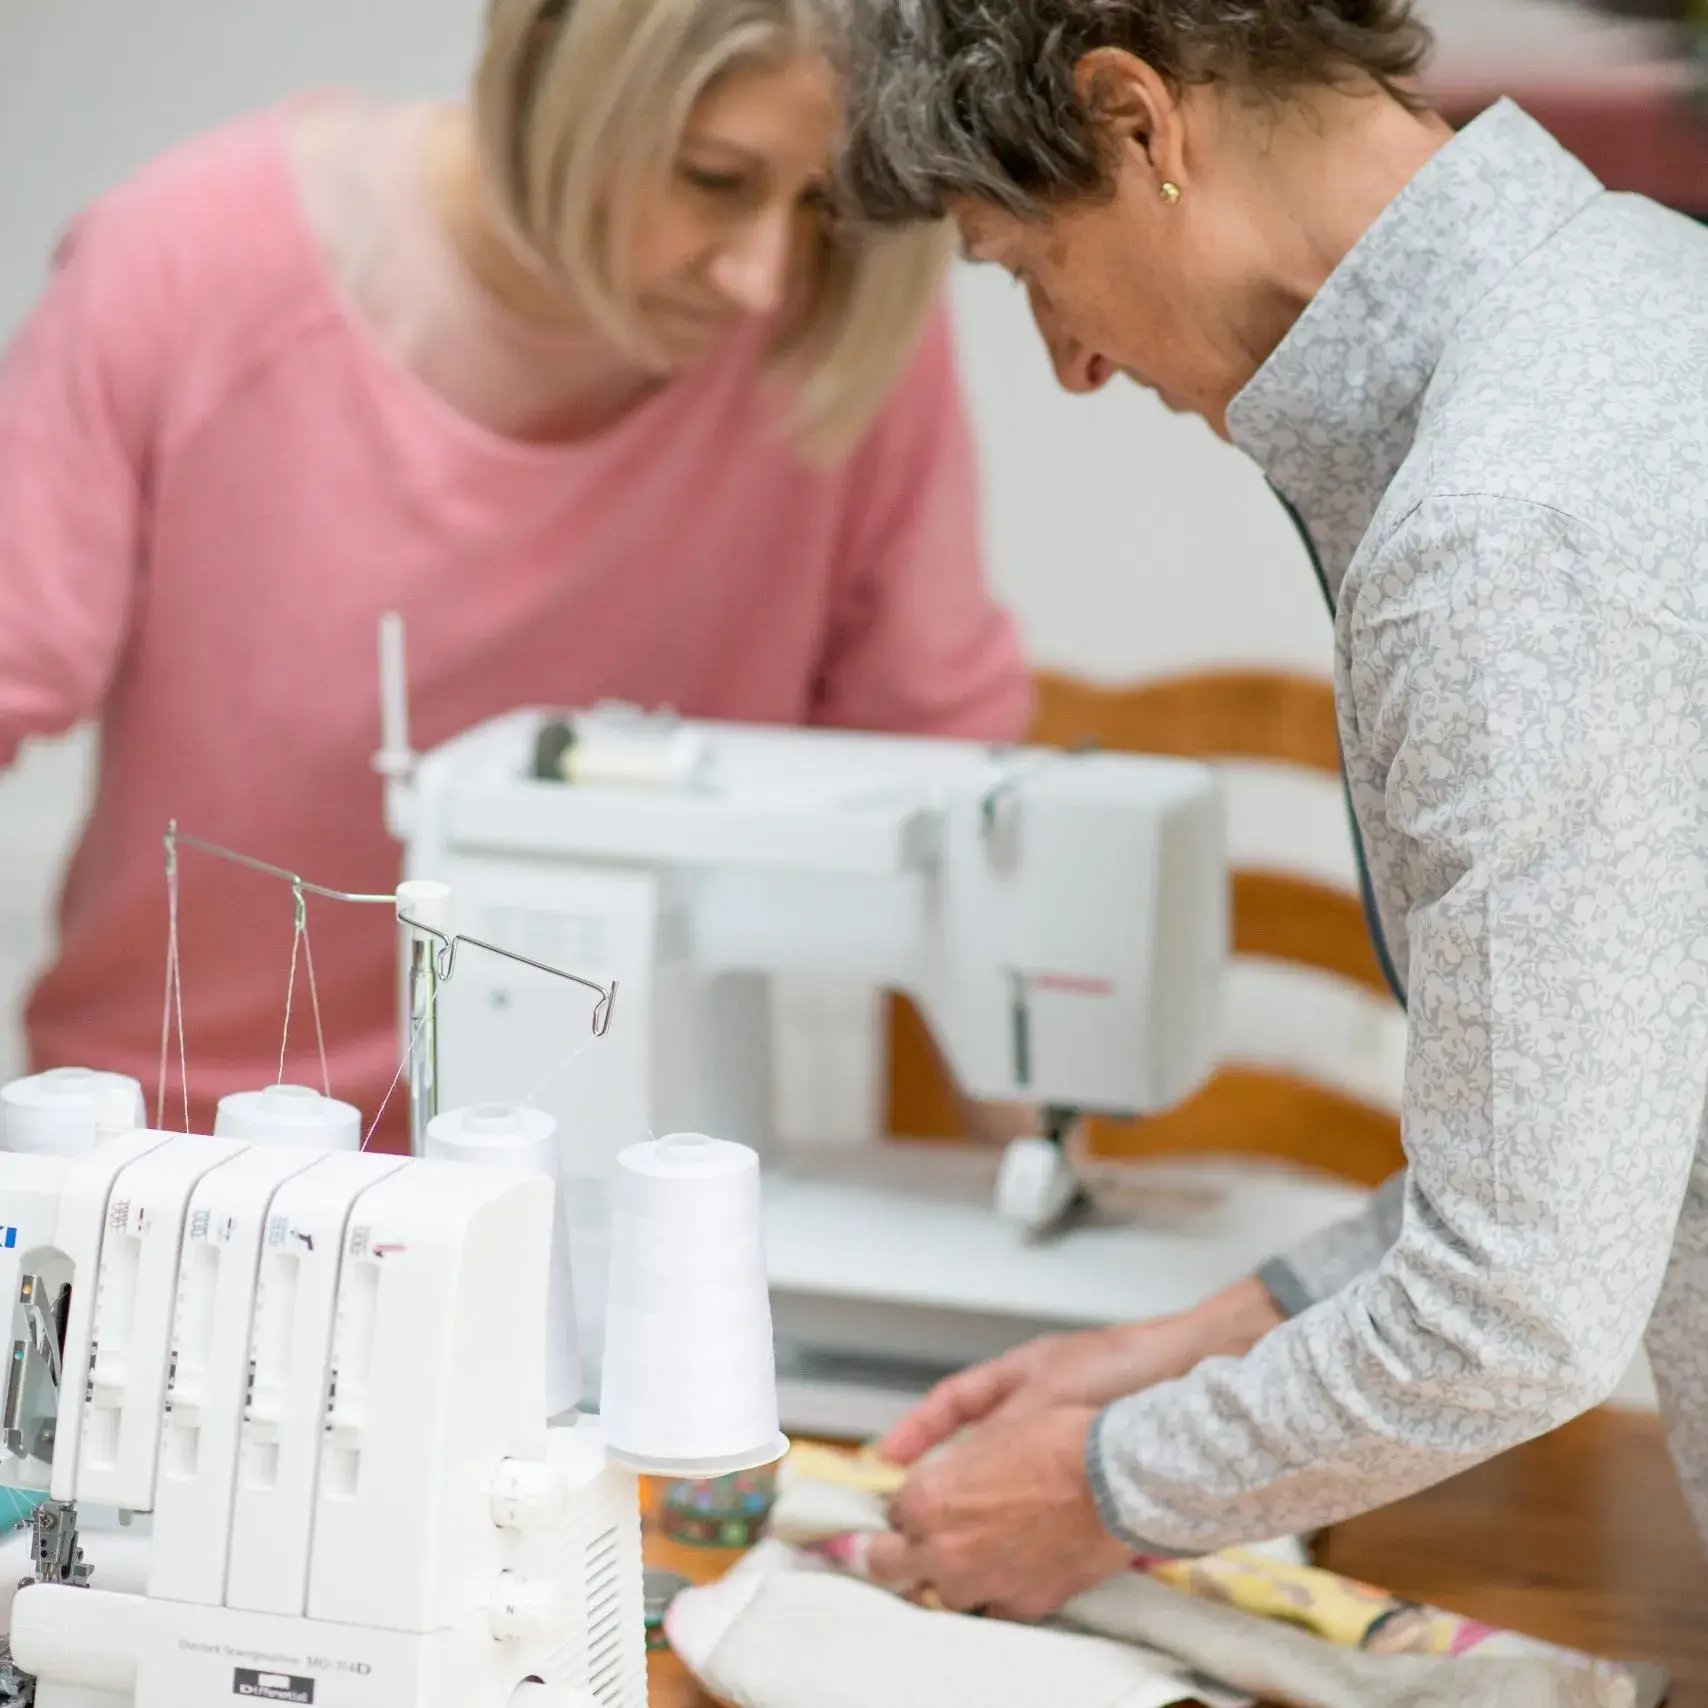 Equilibrium Lifestyle is a client of LoudLocal. This image shows two people using a sewing machine to create equilibrium lifestyle products.